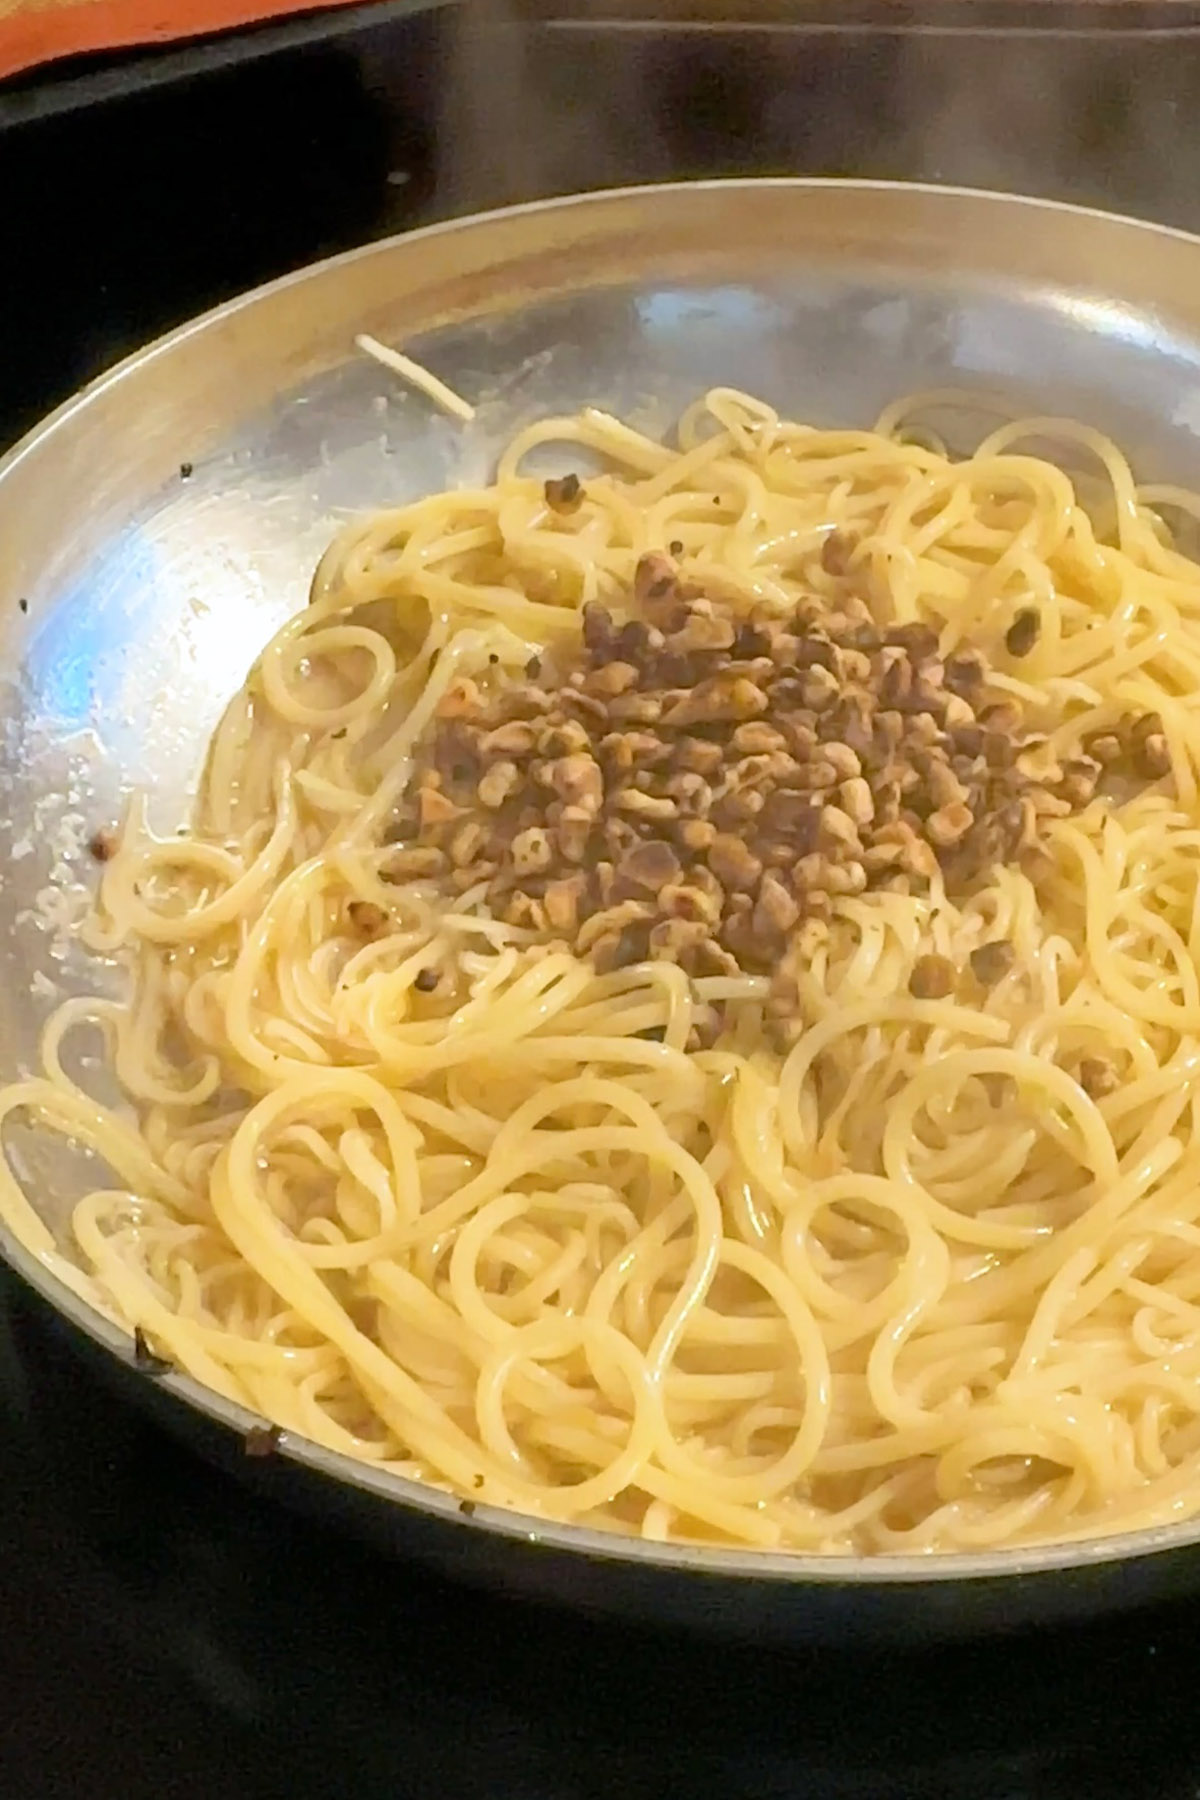 Walnuts are added to pasta in a stainless steel skillet.